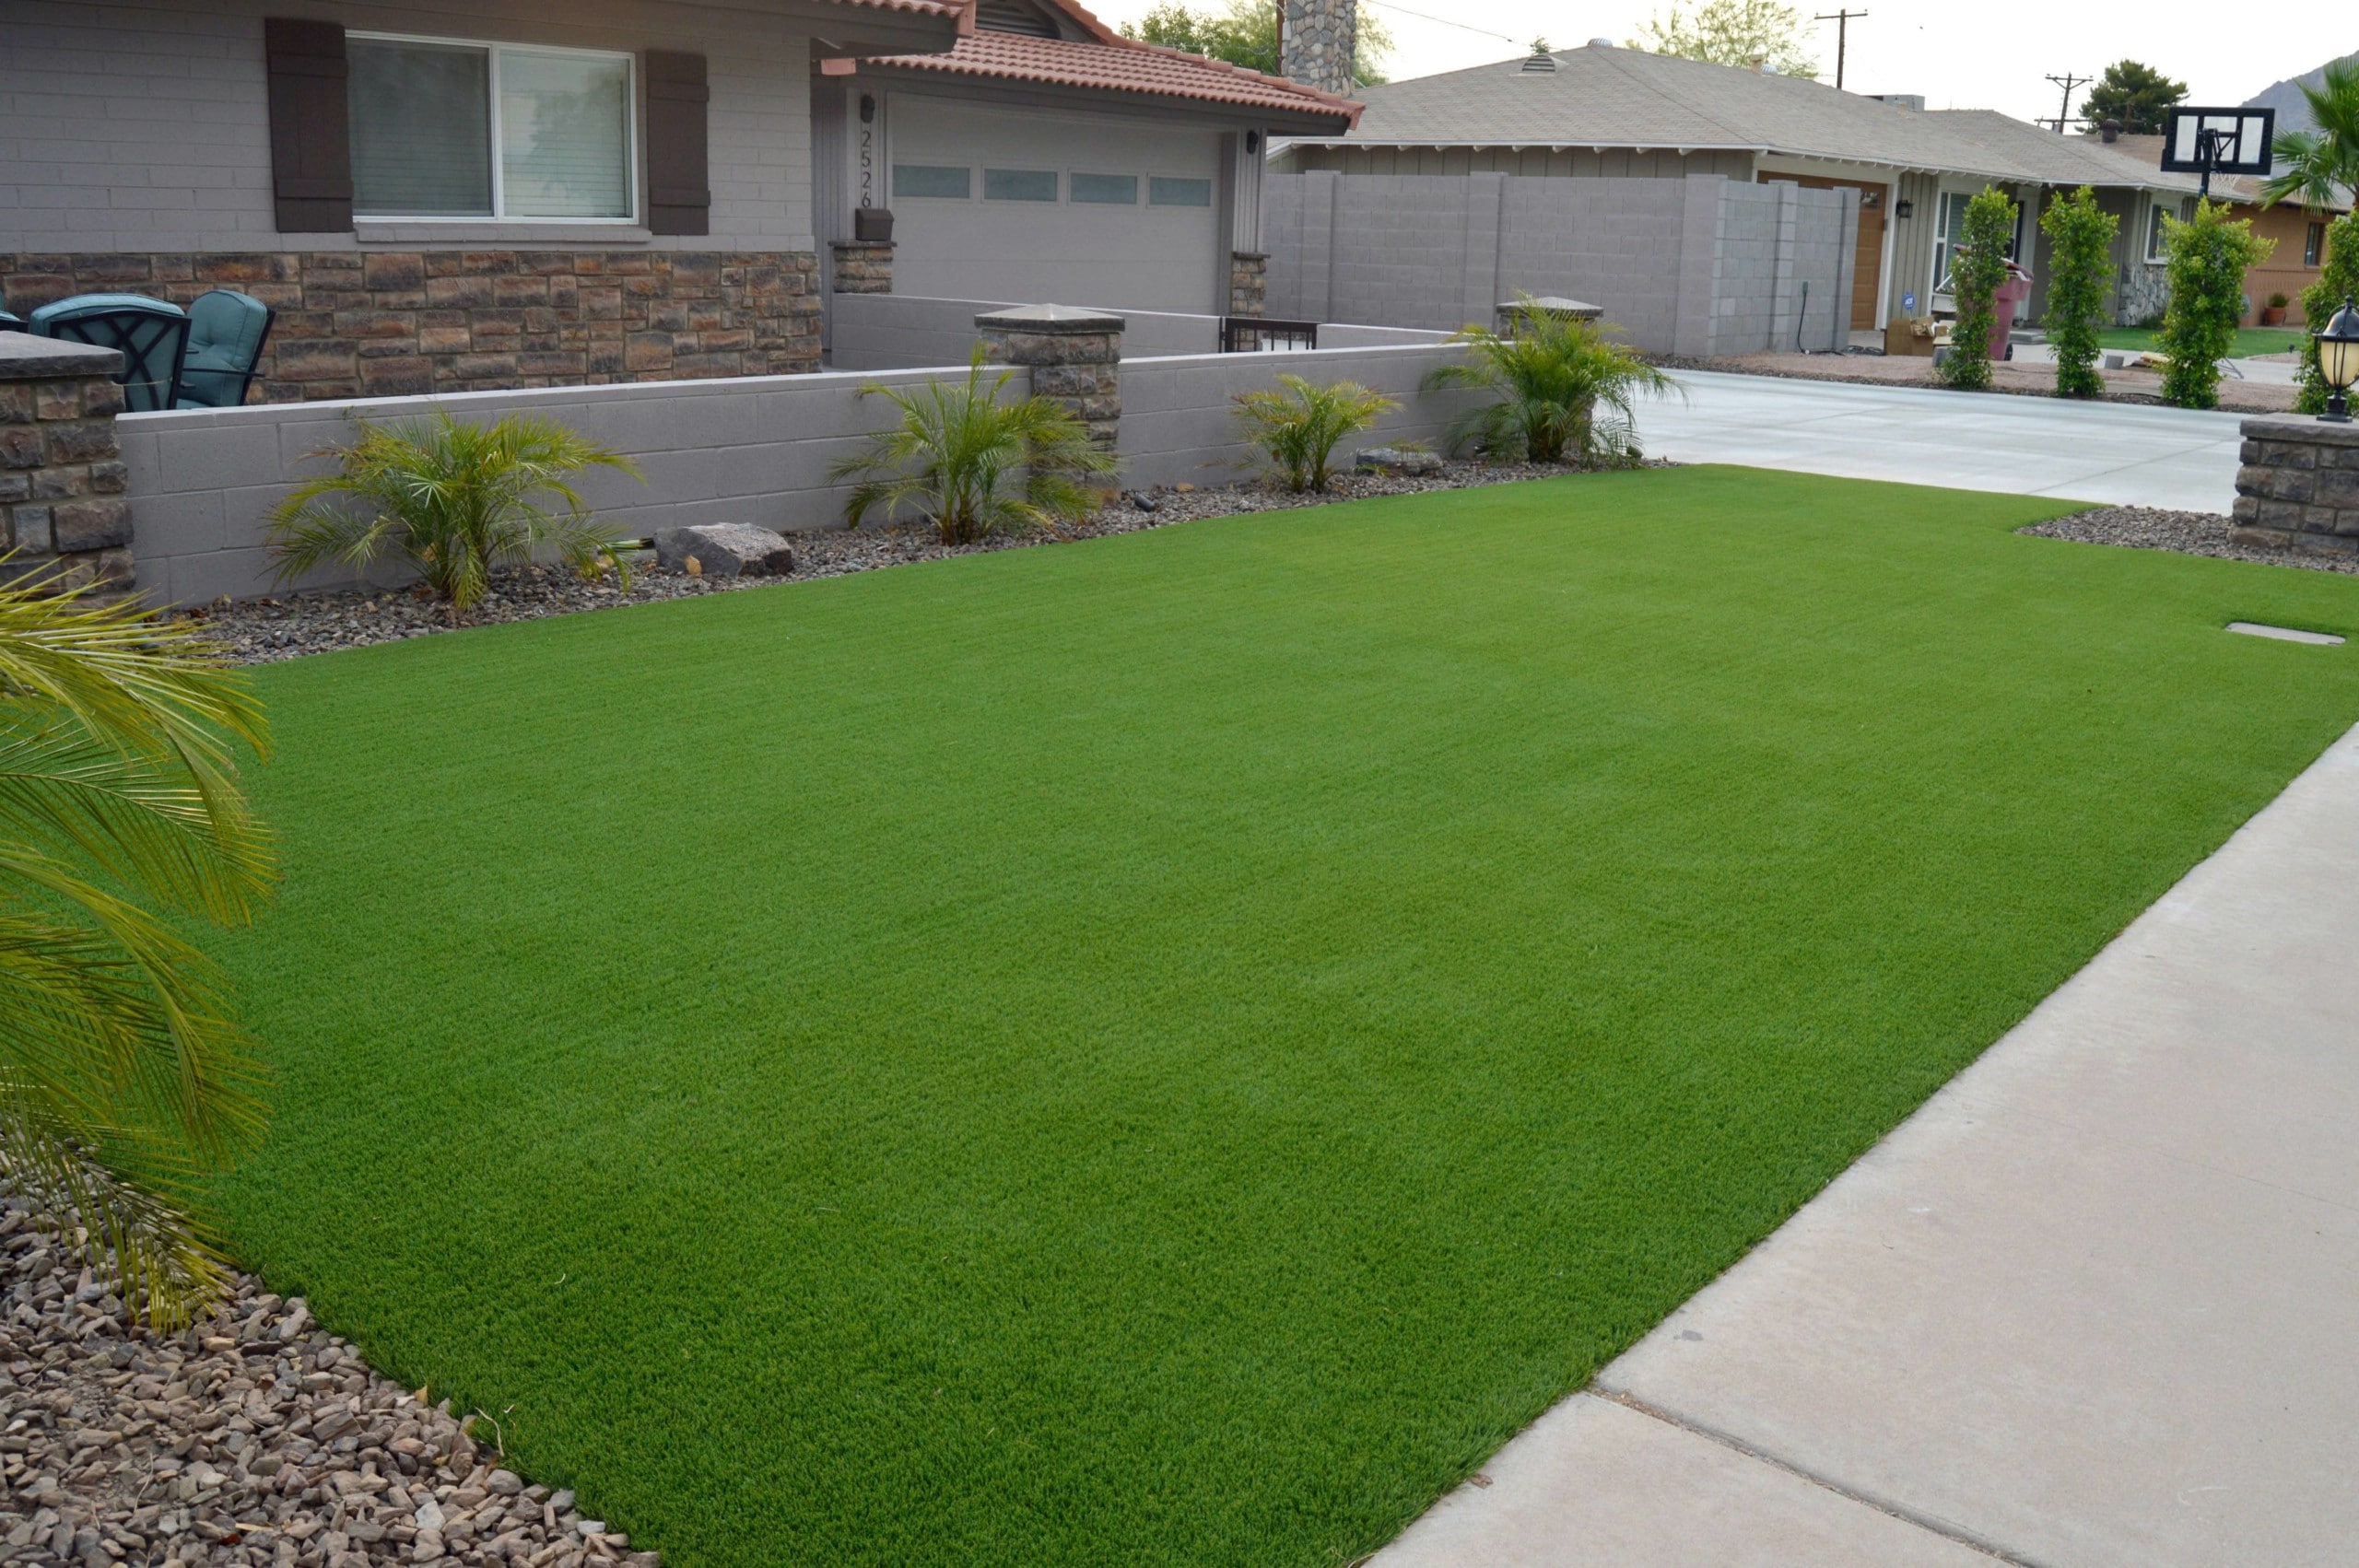 After beautiful centurion stone and artificial grass makeover in Mesa Arizona